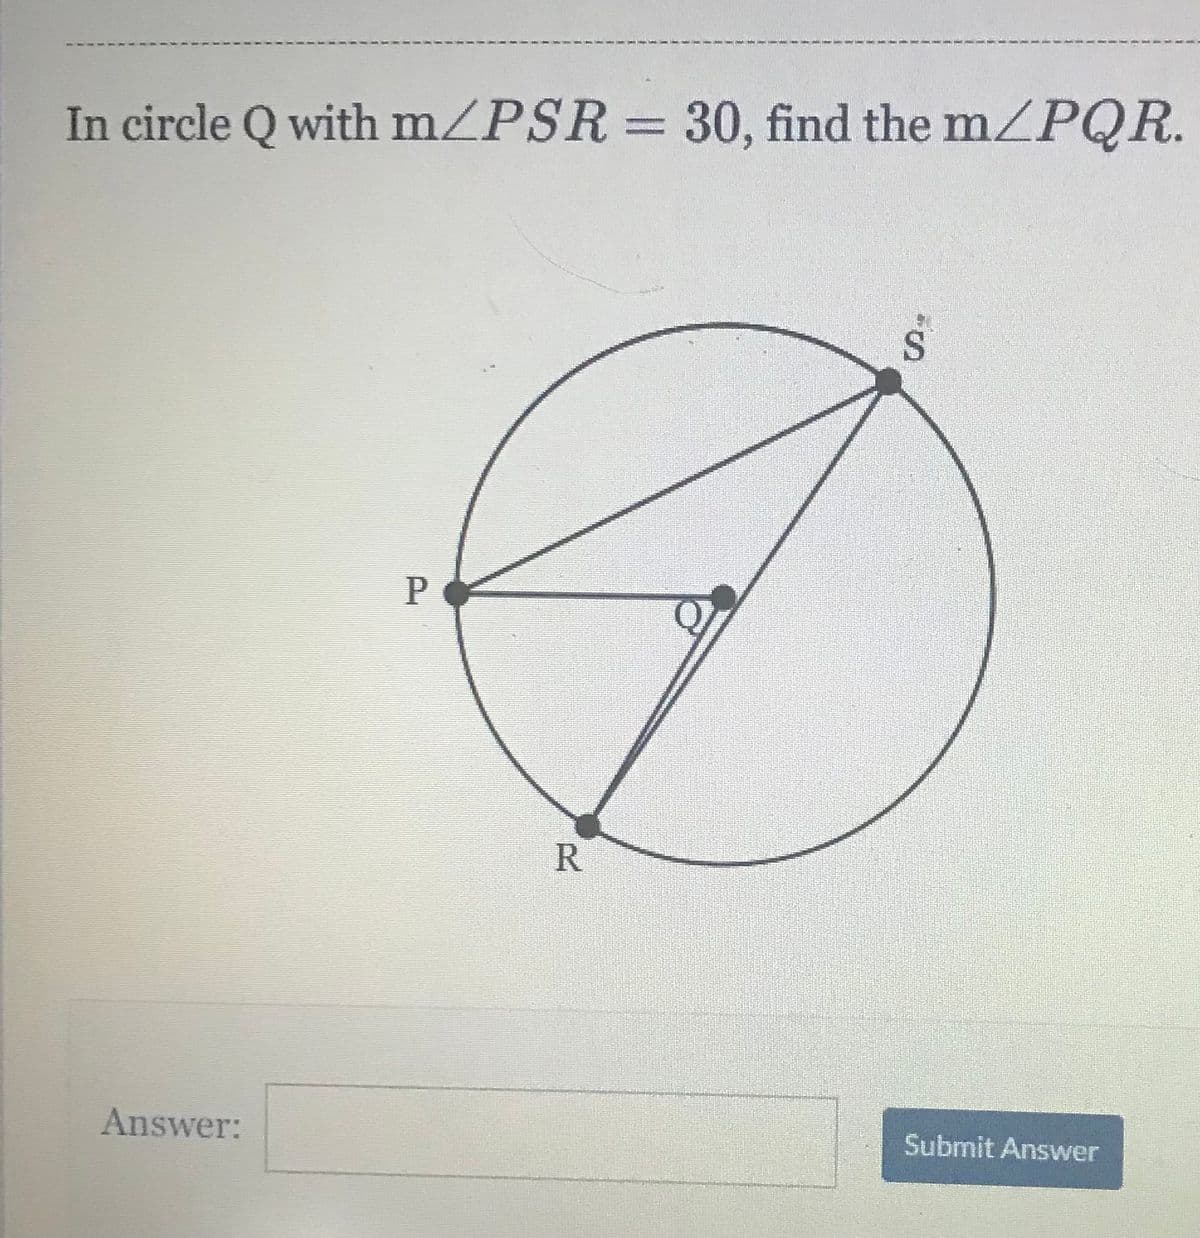 In circle Q with m/PSR = 30, find the mZPQR.
P
R
Answer:
Submit Answer
